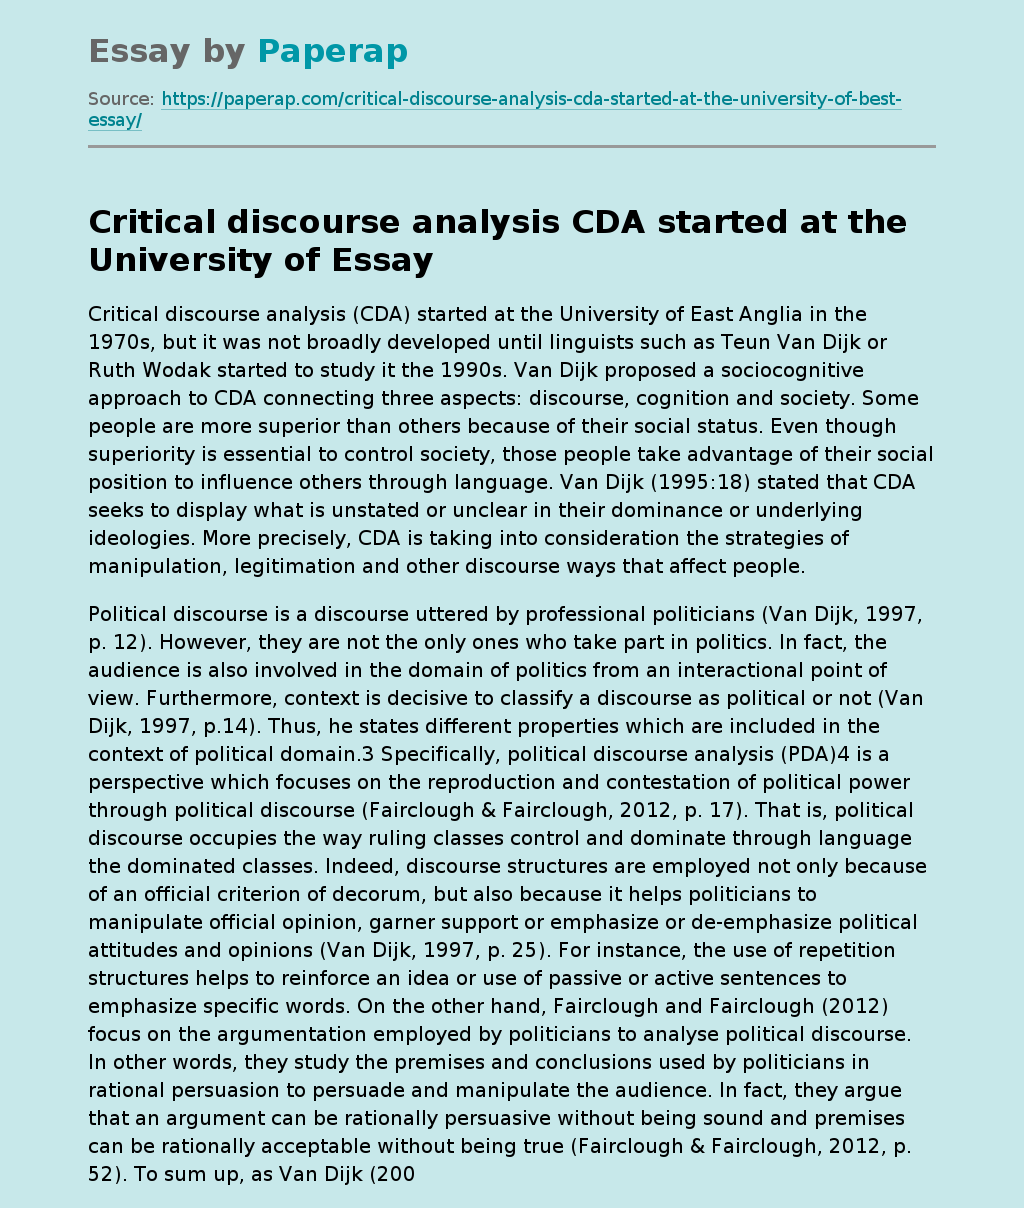 History of Critical Discourse Analysis